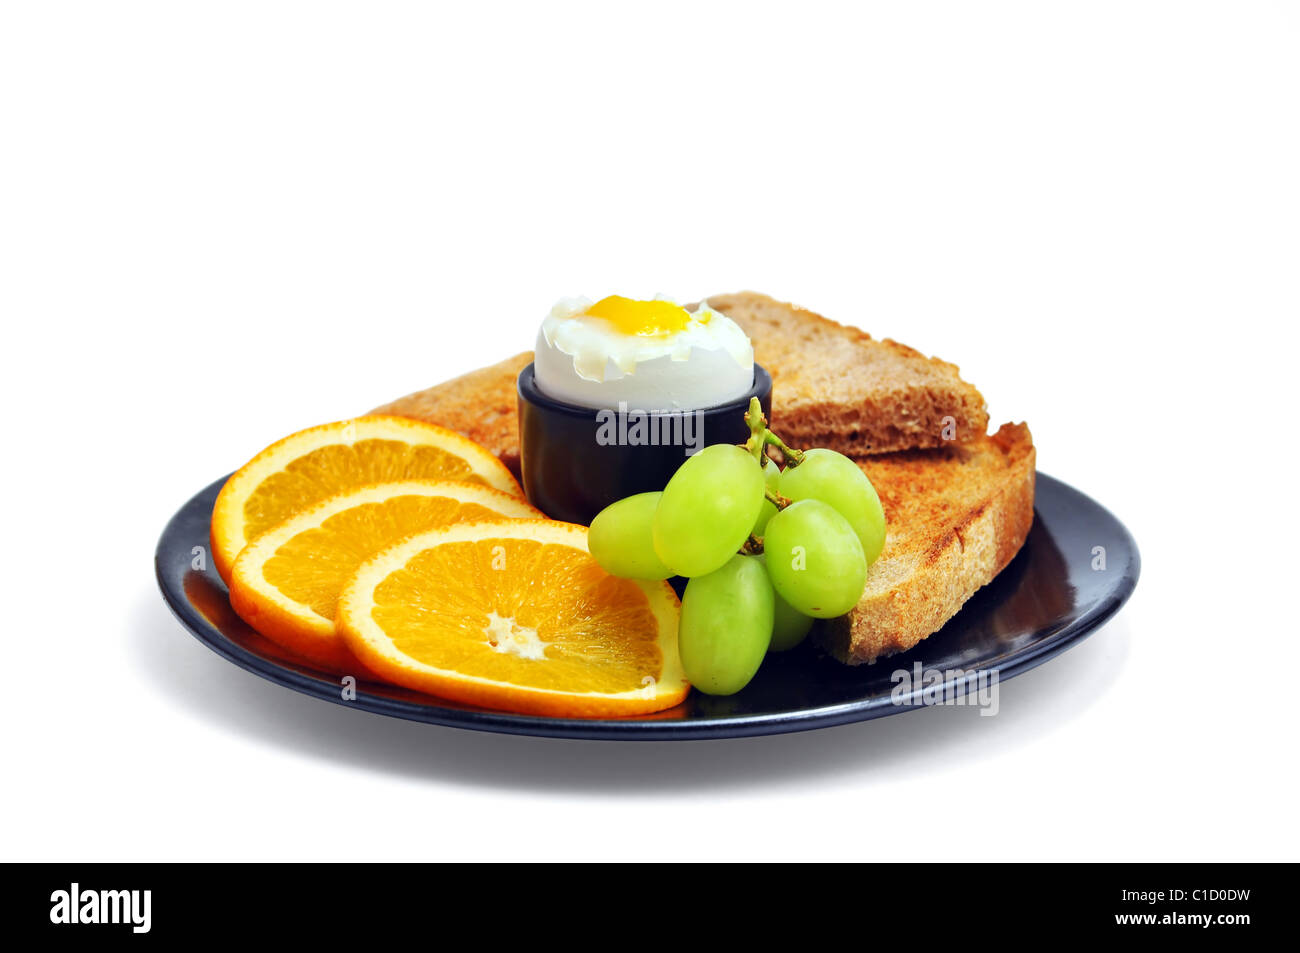 Perfect healthy breakfast: hard boiled egg, slices of oranges, green grapes and multigrain toasted bread. Stock Photo